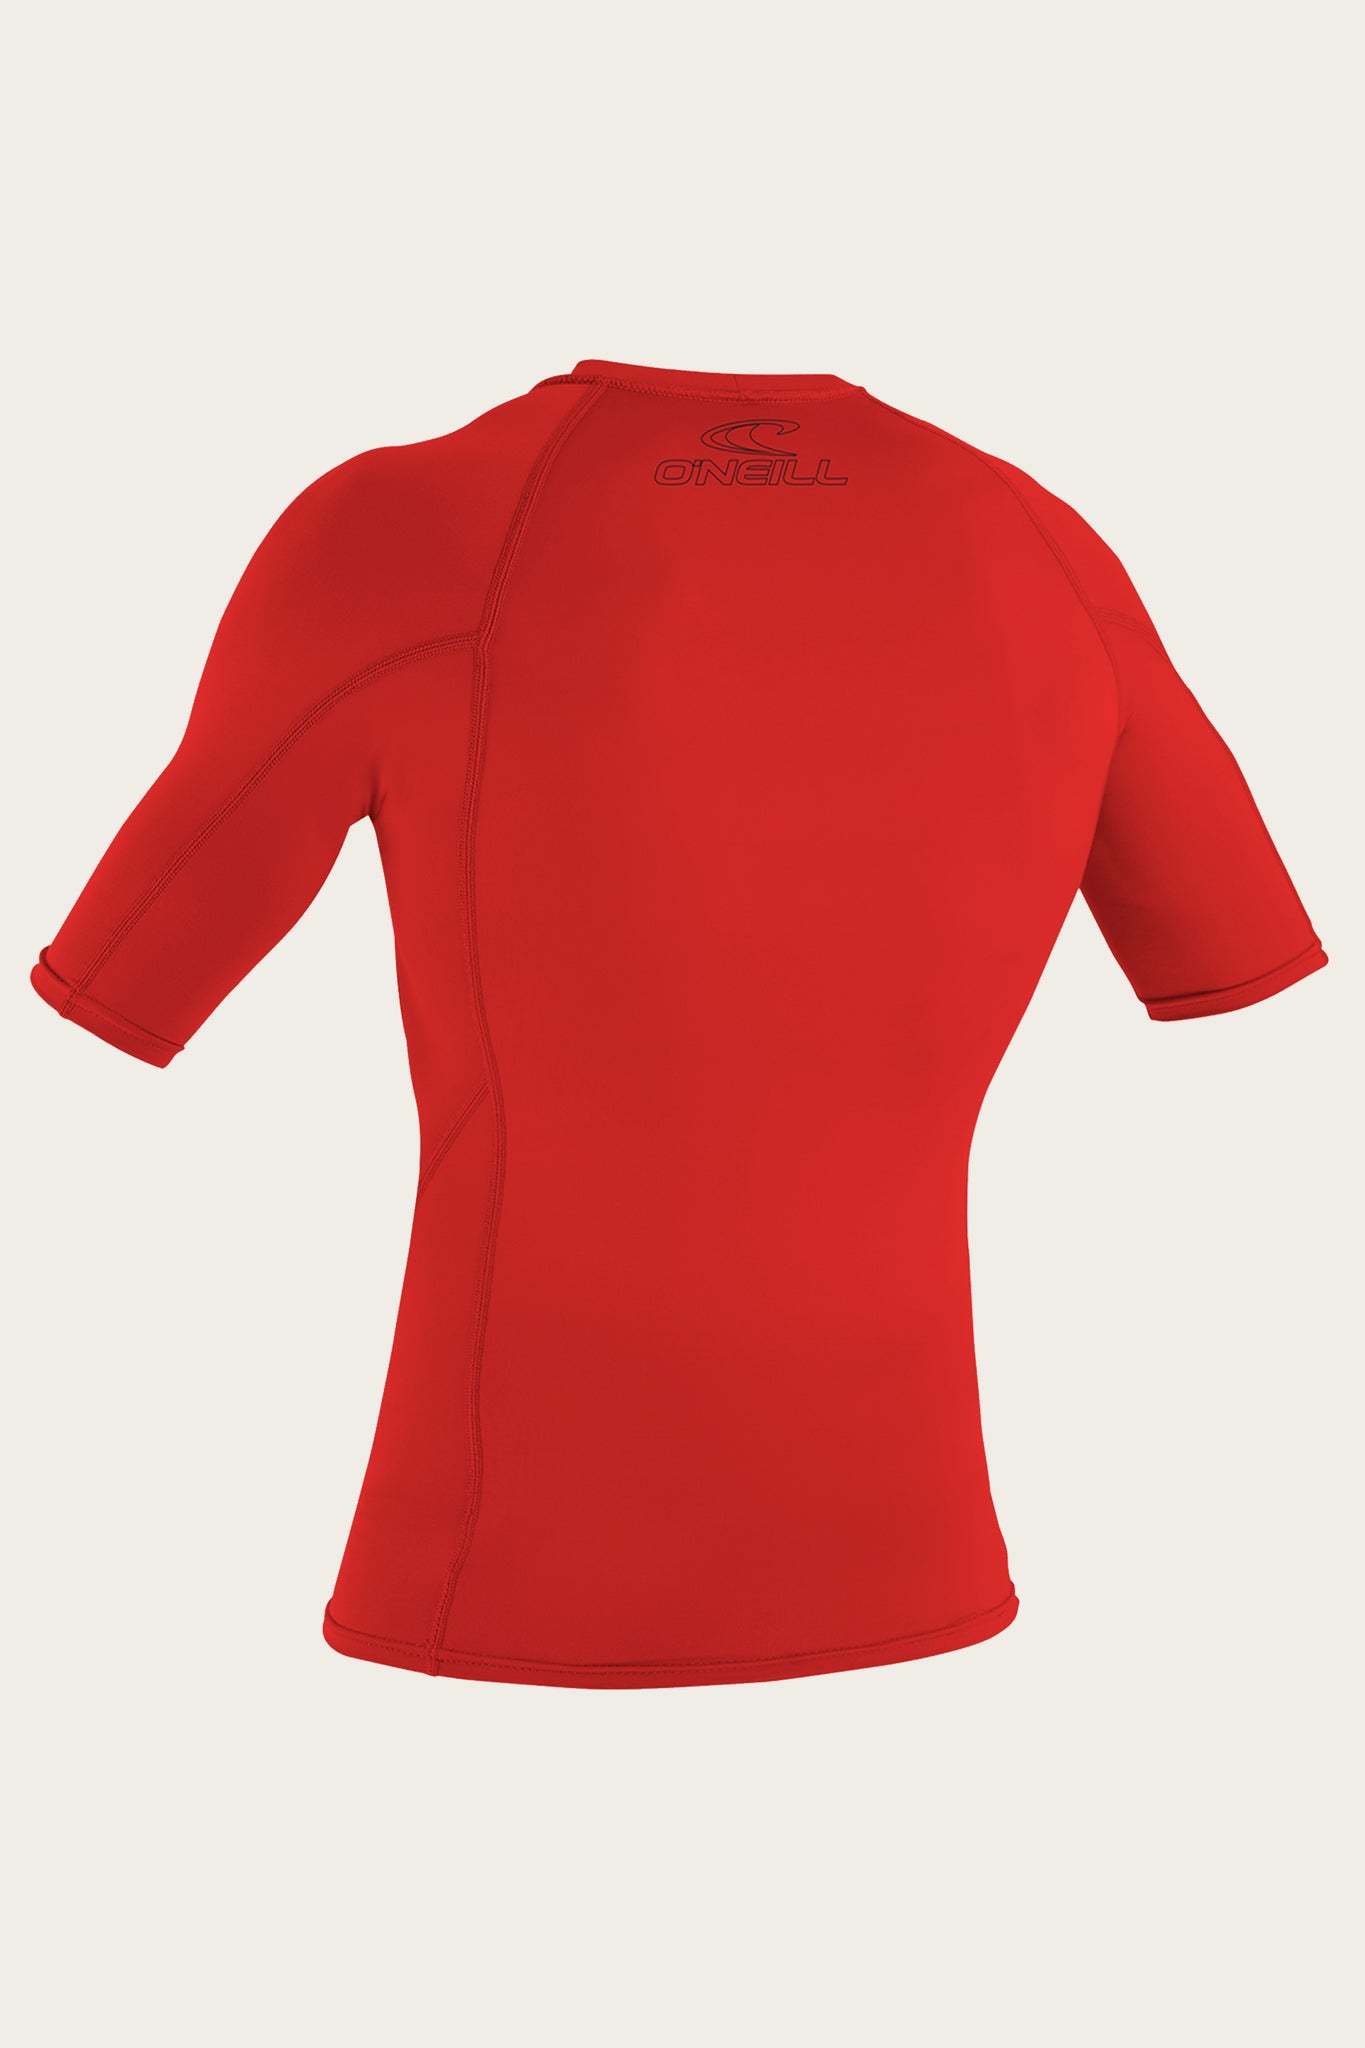 Youth Basic Skins 50+ S/S Rash Guard - Red | O'Neill